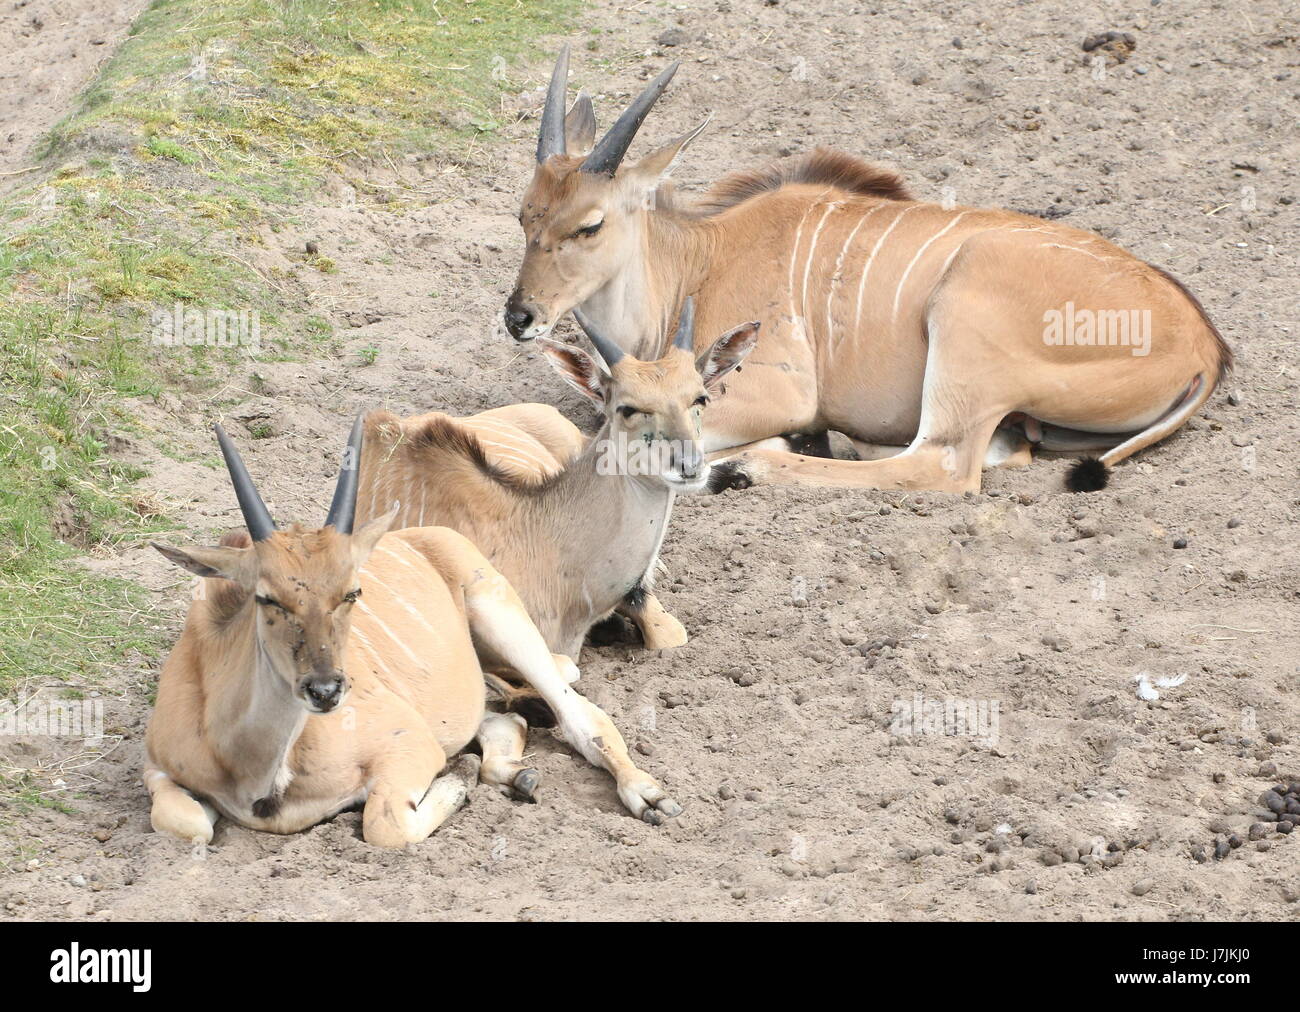 Three lazy Juvenile African Southern or Common Eland antelopes (Taurotragus oryx) resting. Stock Photo